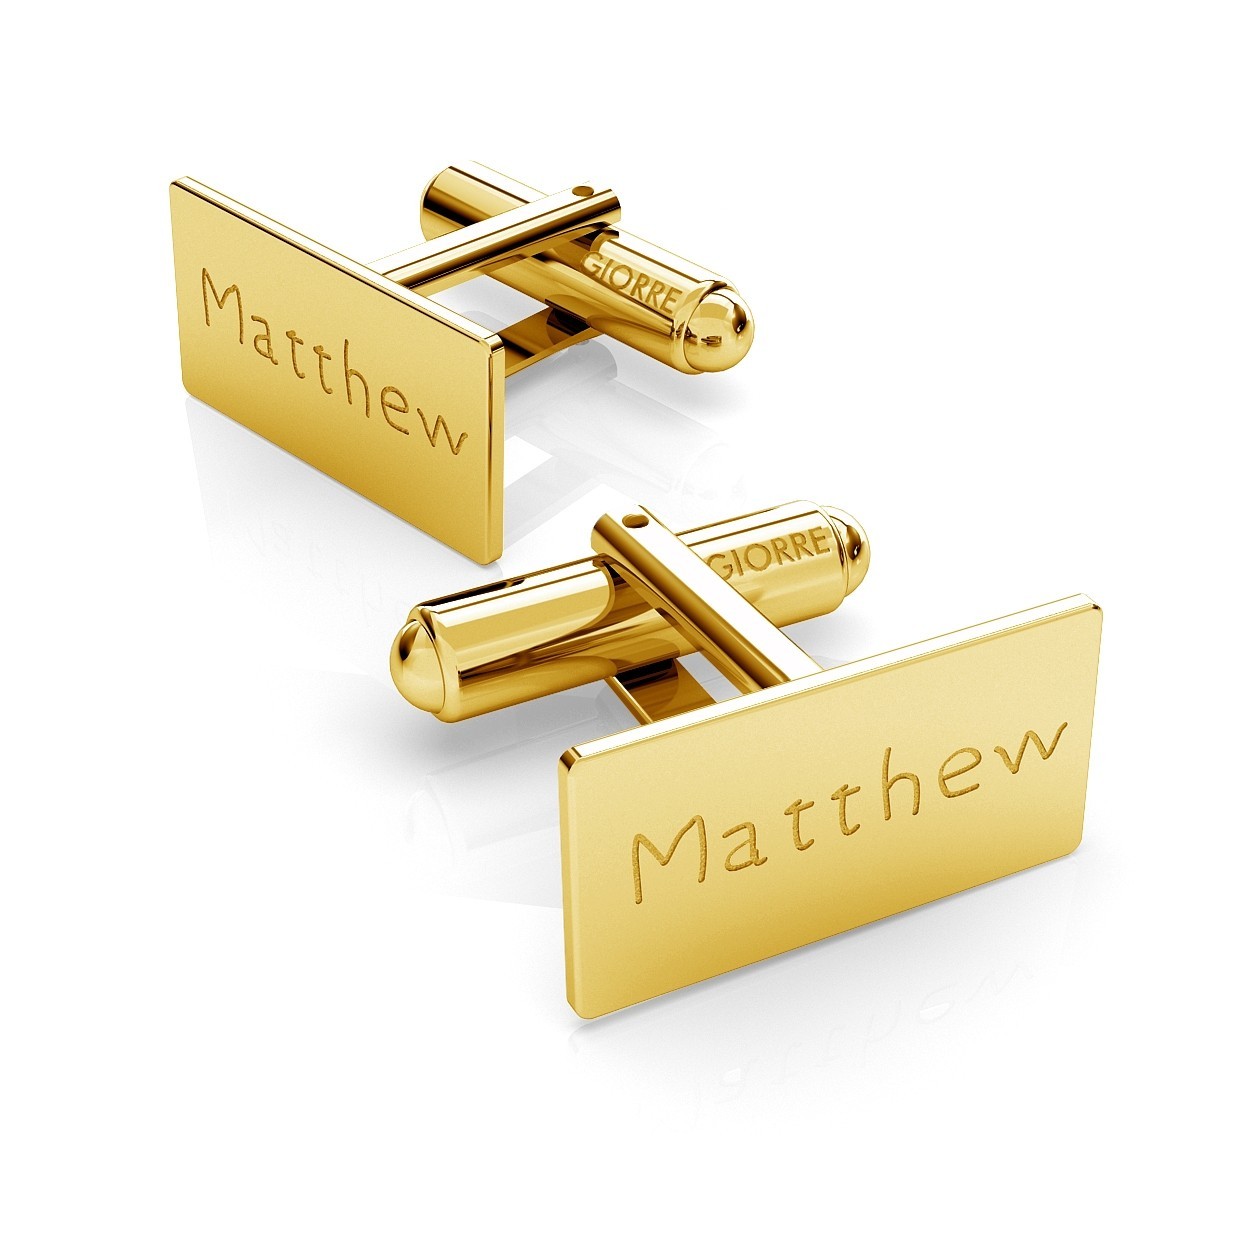 RECTANGLE CUFFLINKS WITH ENGRAVE, SILVER 925, RHODIUM OR GOLD PLATED